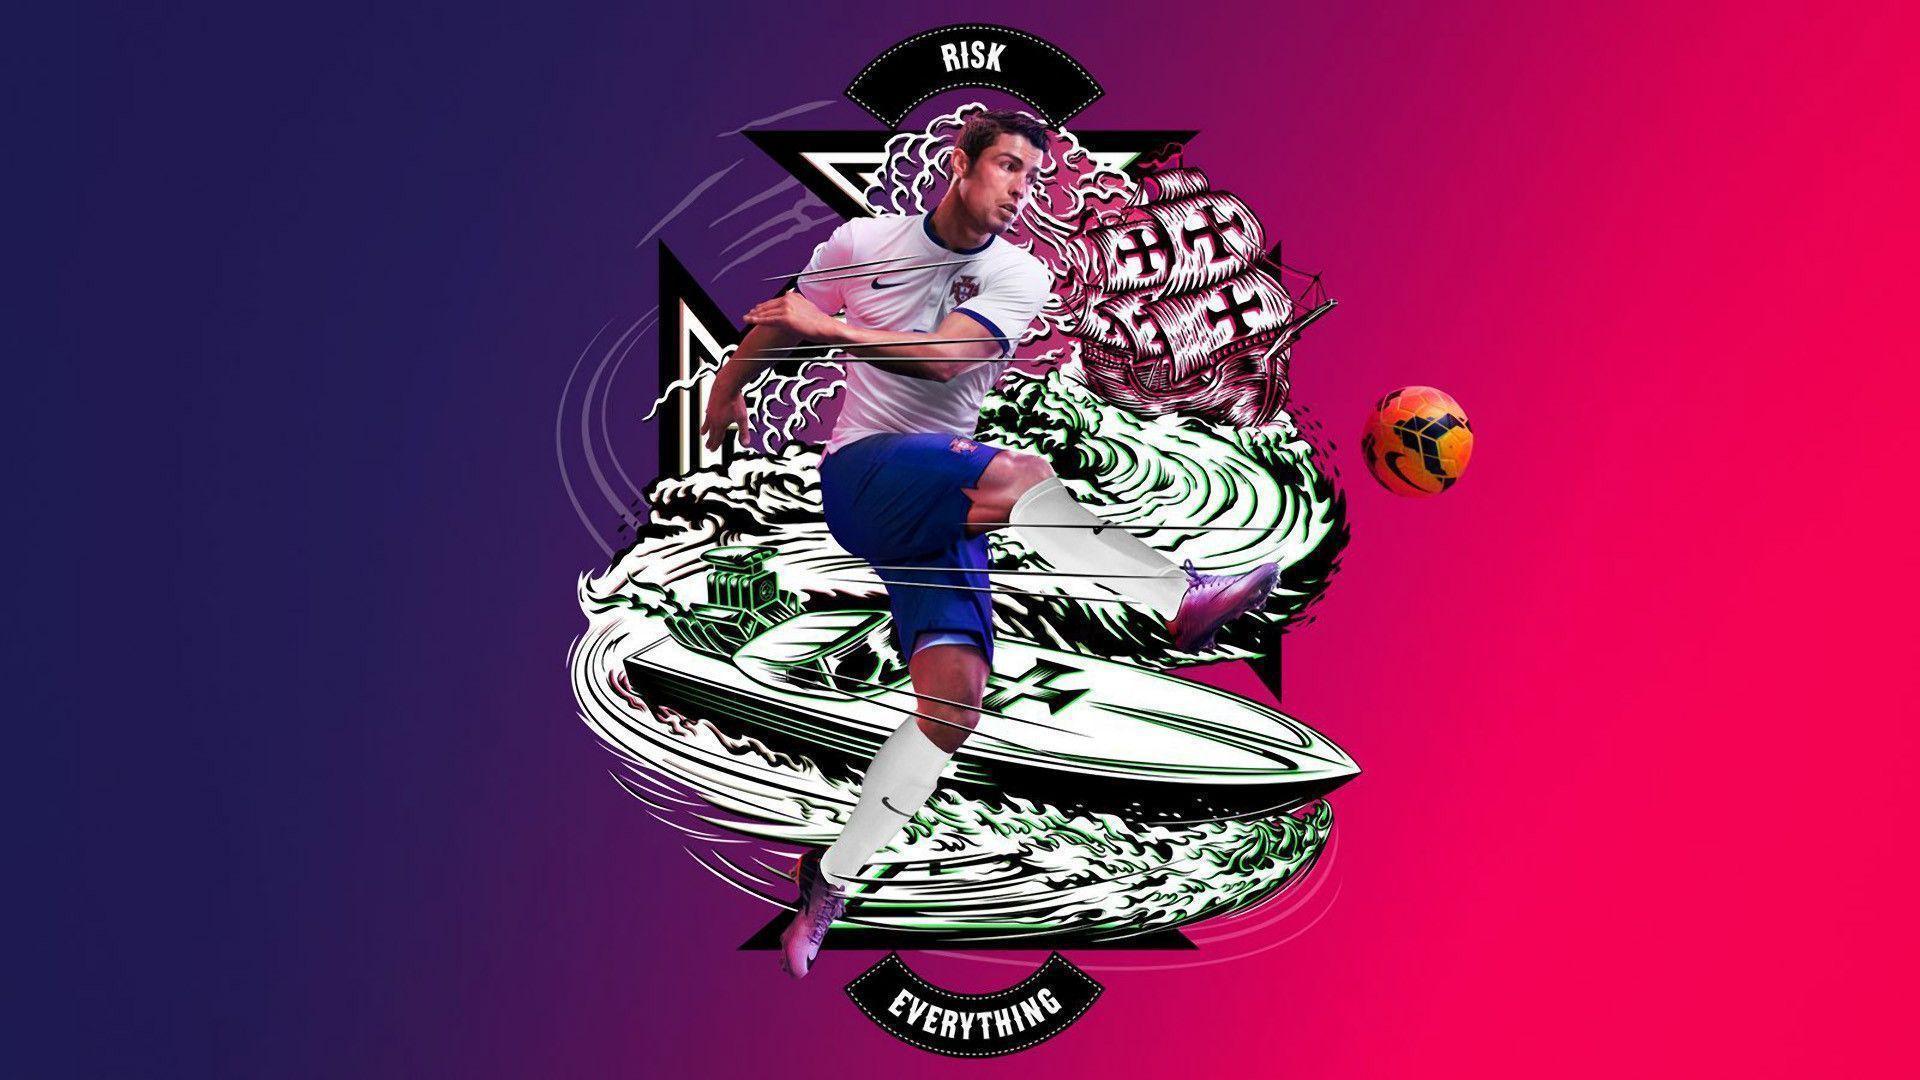 Ronaldo 2014 Portugal Nike Risk Everything Wallpaper Wide or HD